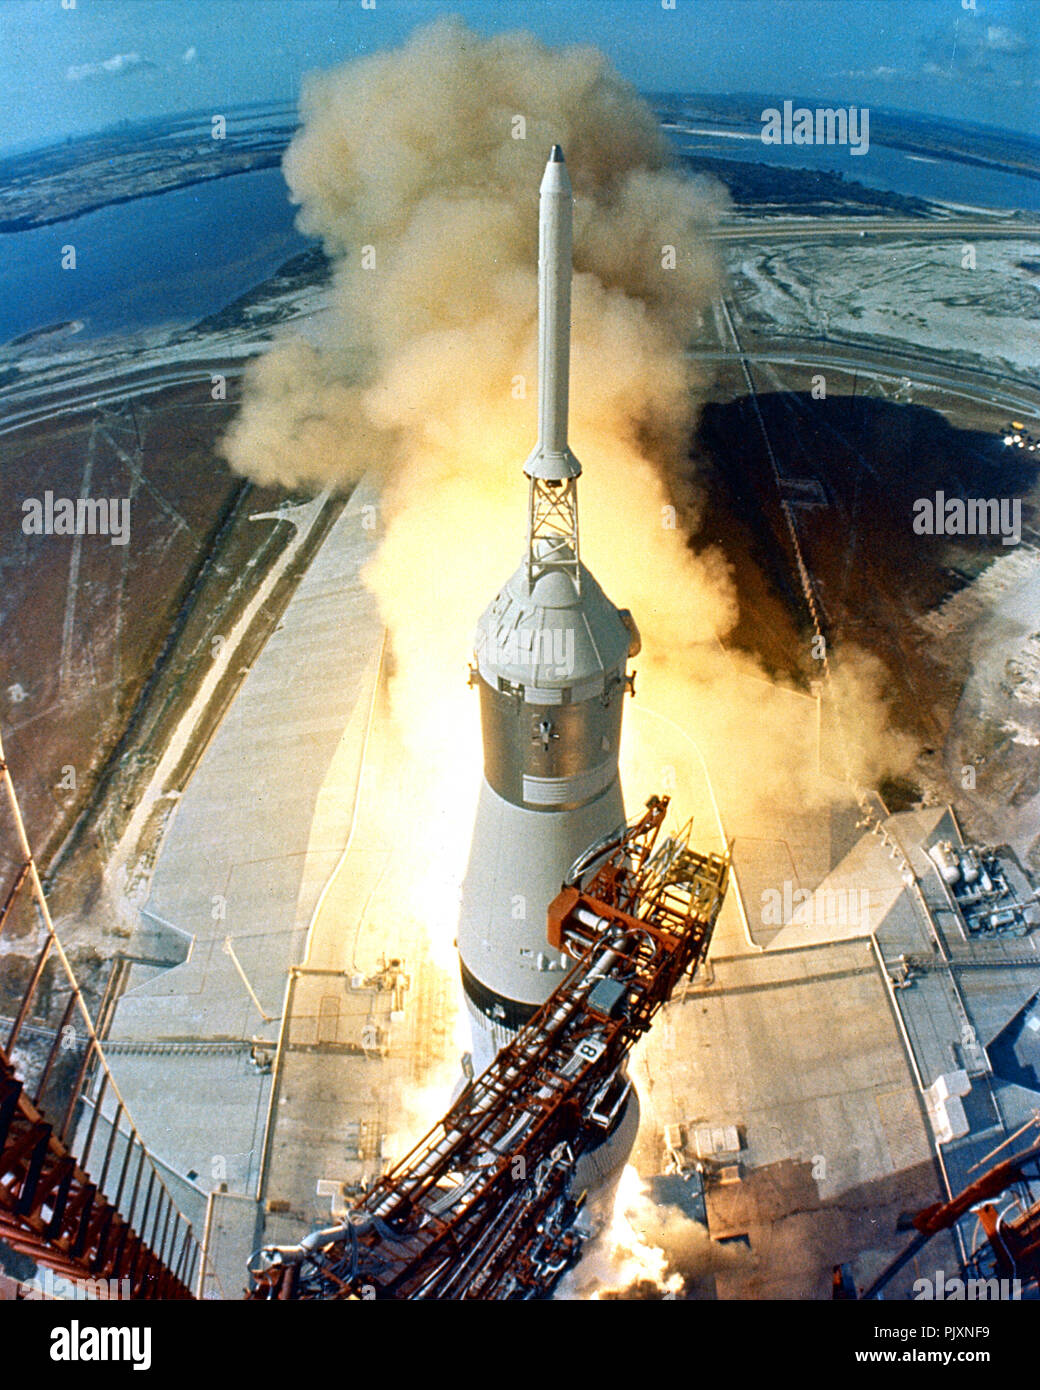 Cape Canaveral, FL - (FILE) -- At 9:32 a.m. EDT, Wednesday, July 16, 1969, the swing arms move away and a plume of flame signals the liftoff of the Apollo 11 Saturn V space vehicle and astronauts Neil A. Armstrong, Michael Collins and Edwin E. Aldrin, Jr. from Kennedy Space Center Launch Complex 39A. Credit: NASA via CNP /MediaPunch Stock Photo